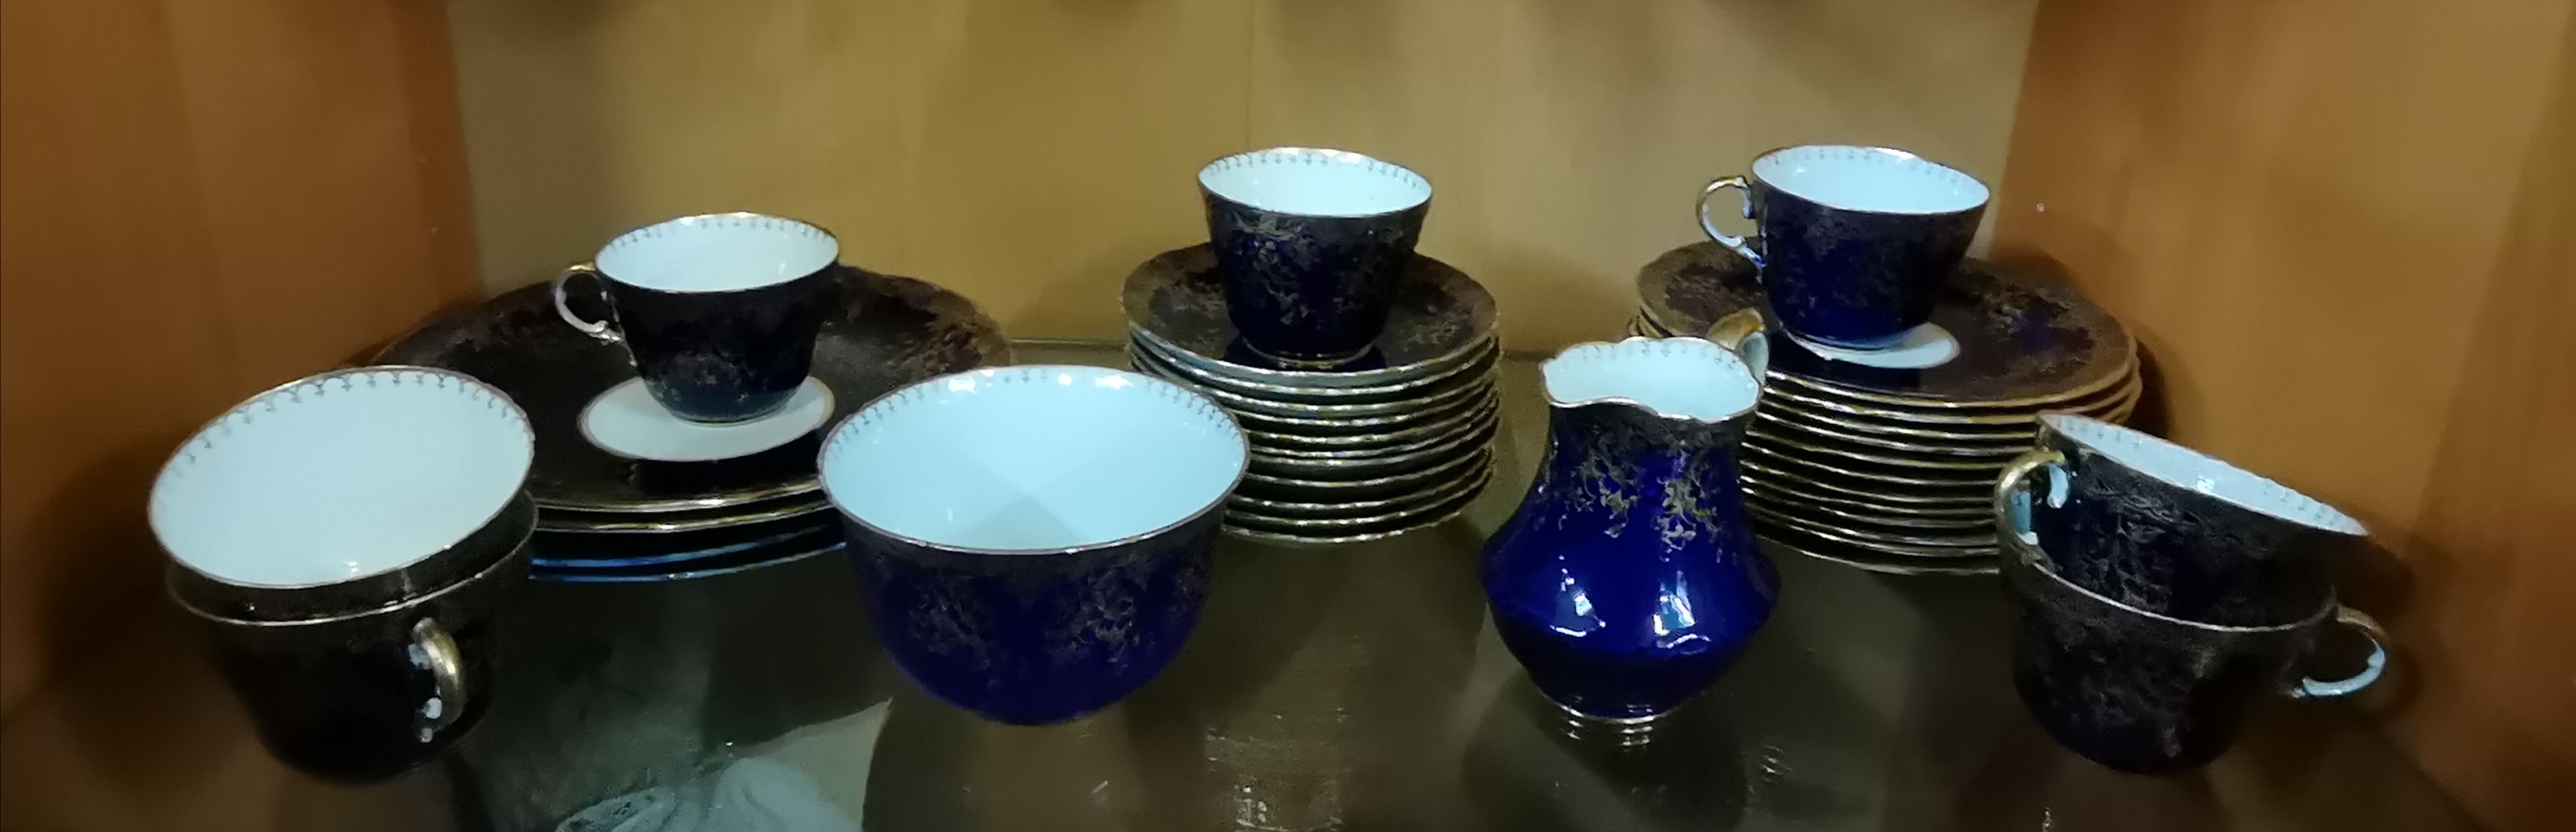 Aynsley China part Tea Set in blue with gold gilt decoration